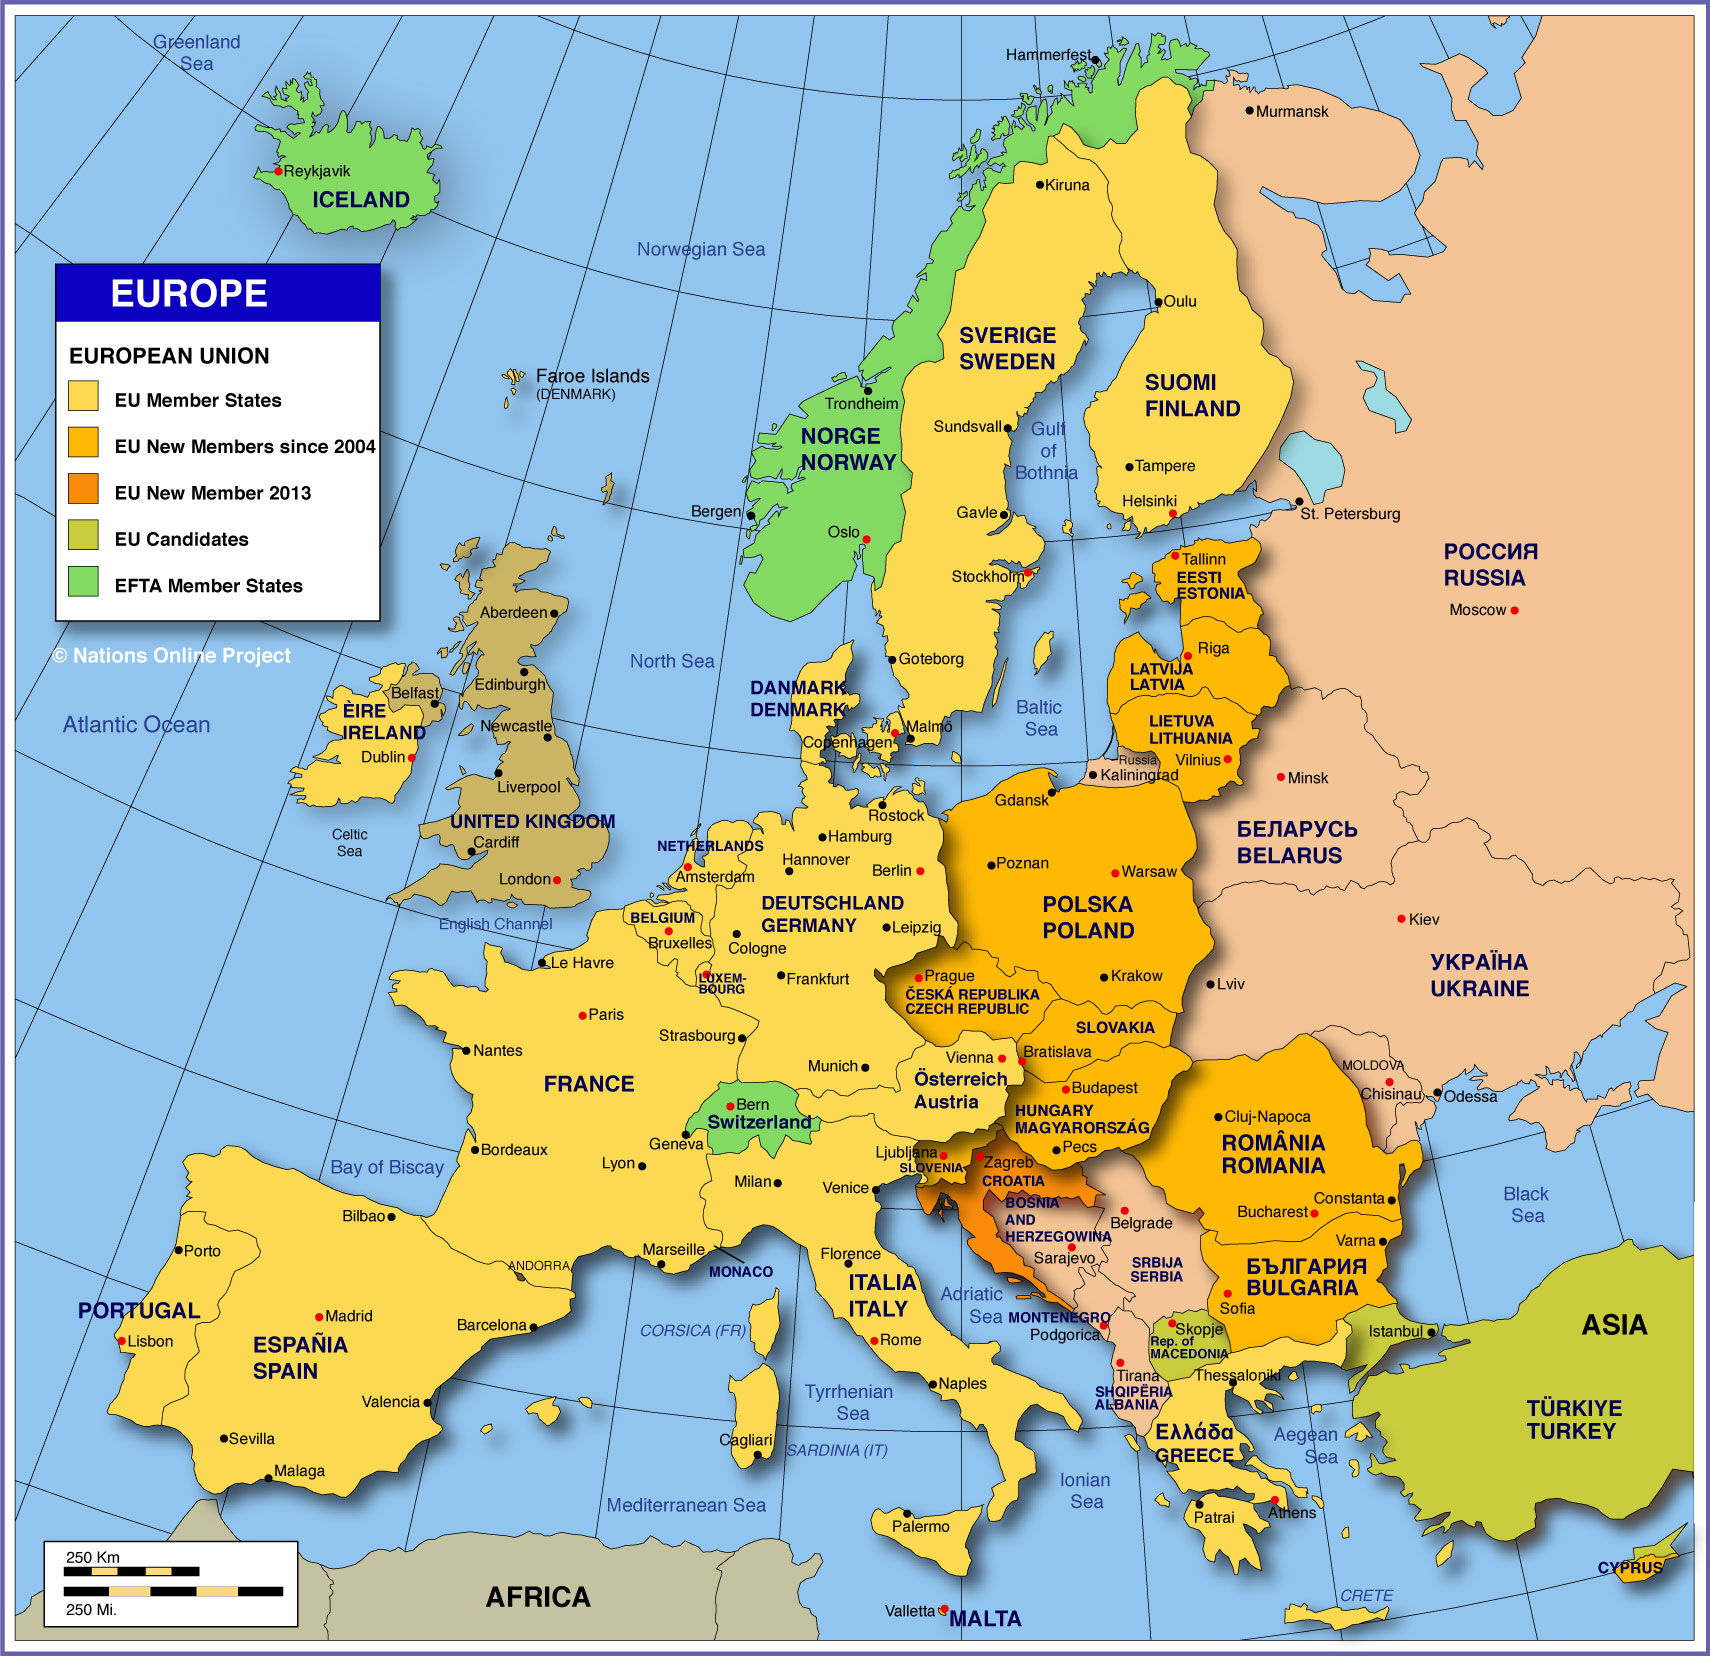 color coded map of europe Map Of Europe Member States Of The Eu Nations Online Project color coded map of europe